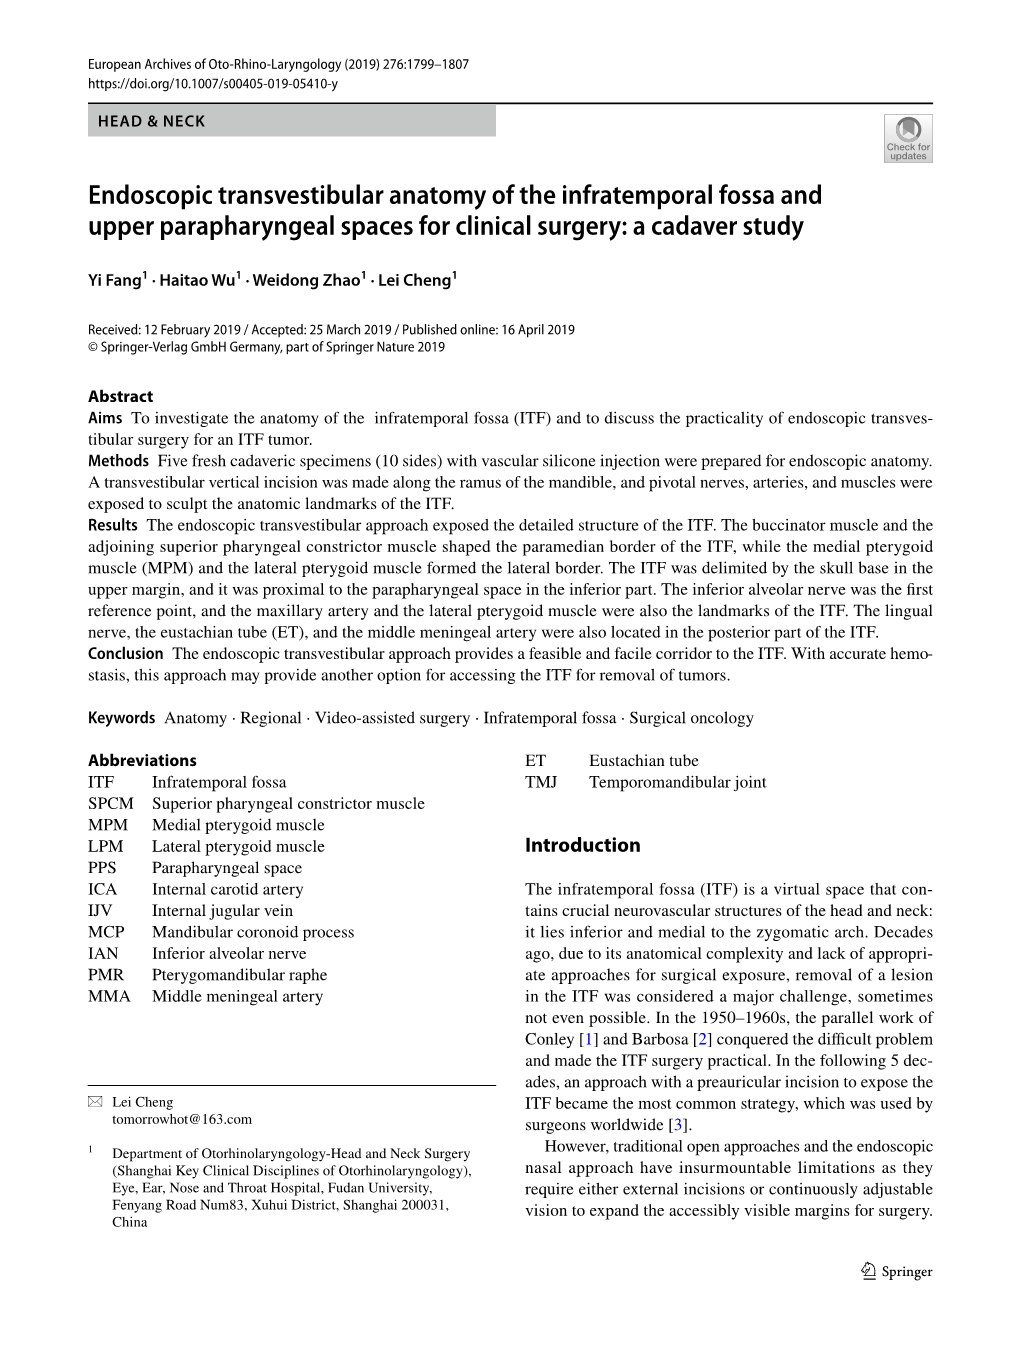 Endoscopic Transvestibular Anatomy of the Infratemporal Fossa and Upper Parapharyngeal Spaces for Clinical Surgery: a Cadaver Study